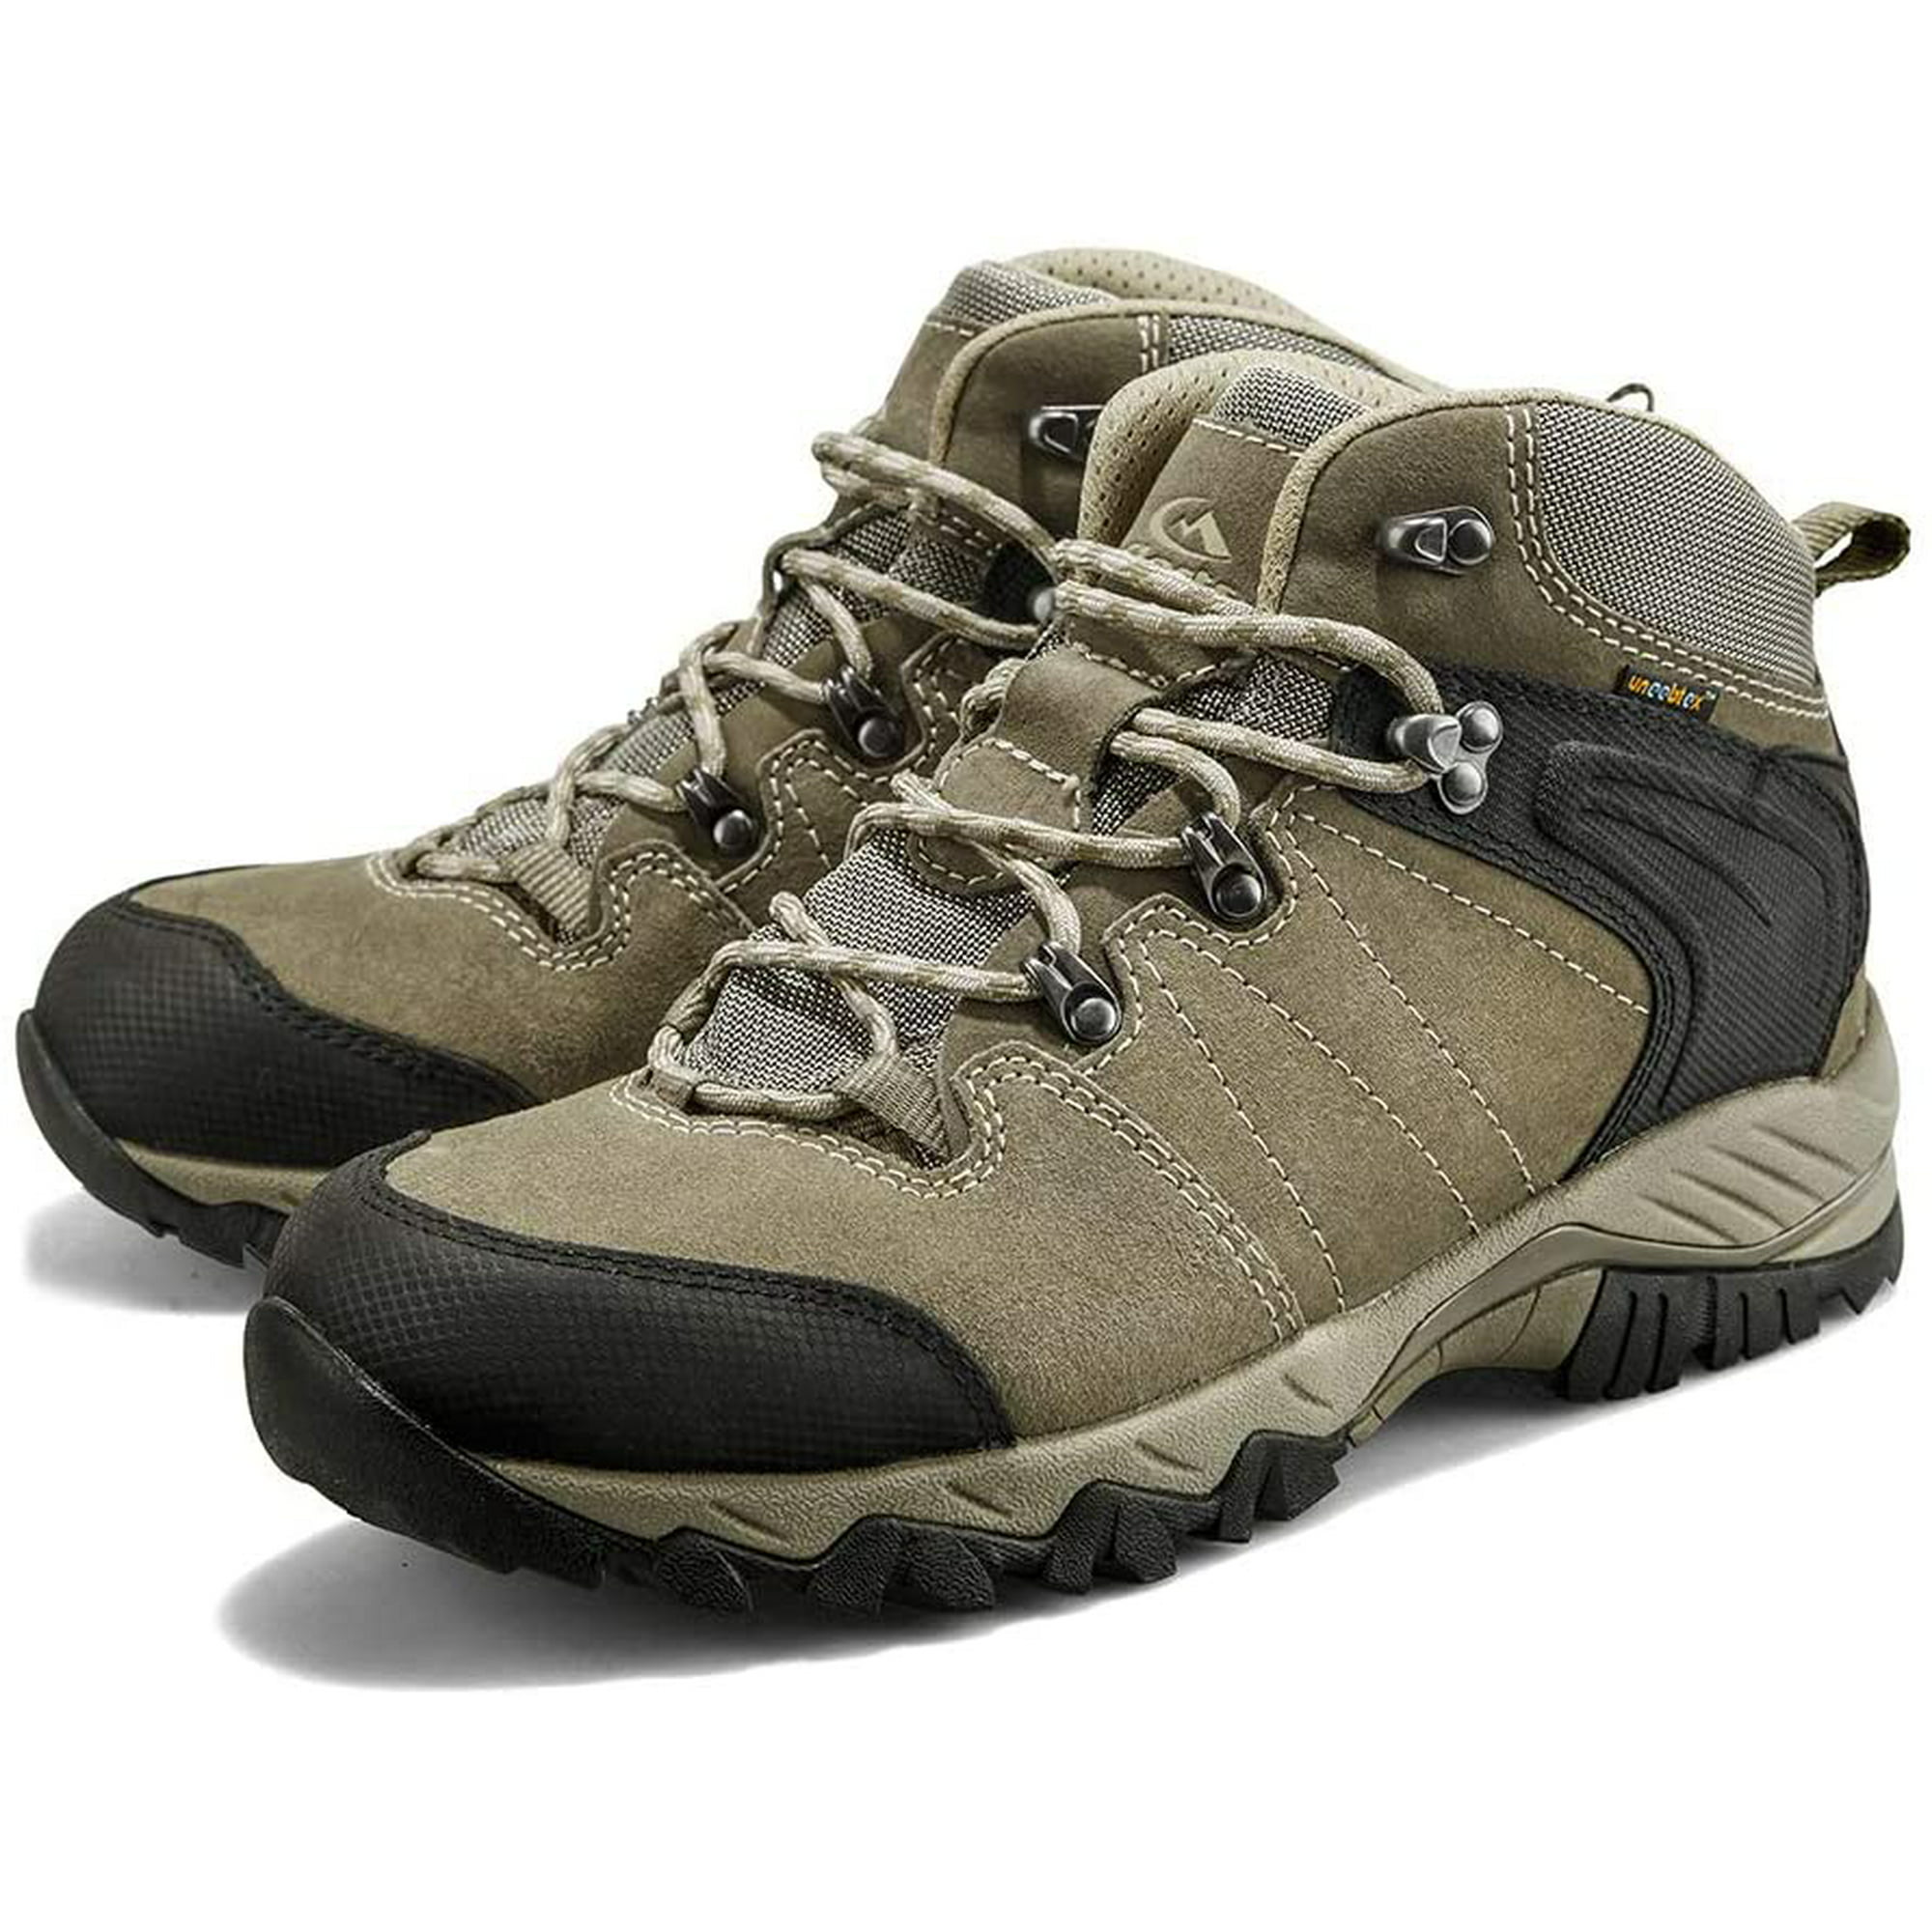 Hiking Boots Lightweight Breathable Waterproof Hiking Shoes for Men and  Women Outdoor Backpacking Climbing Hiking | Walmart Canada